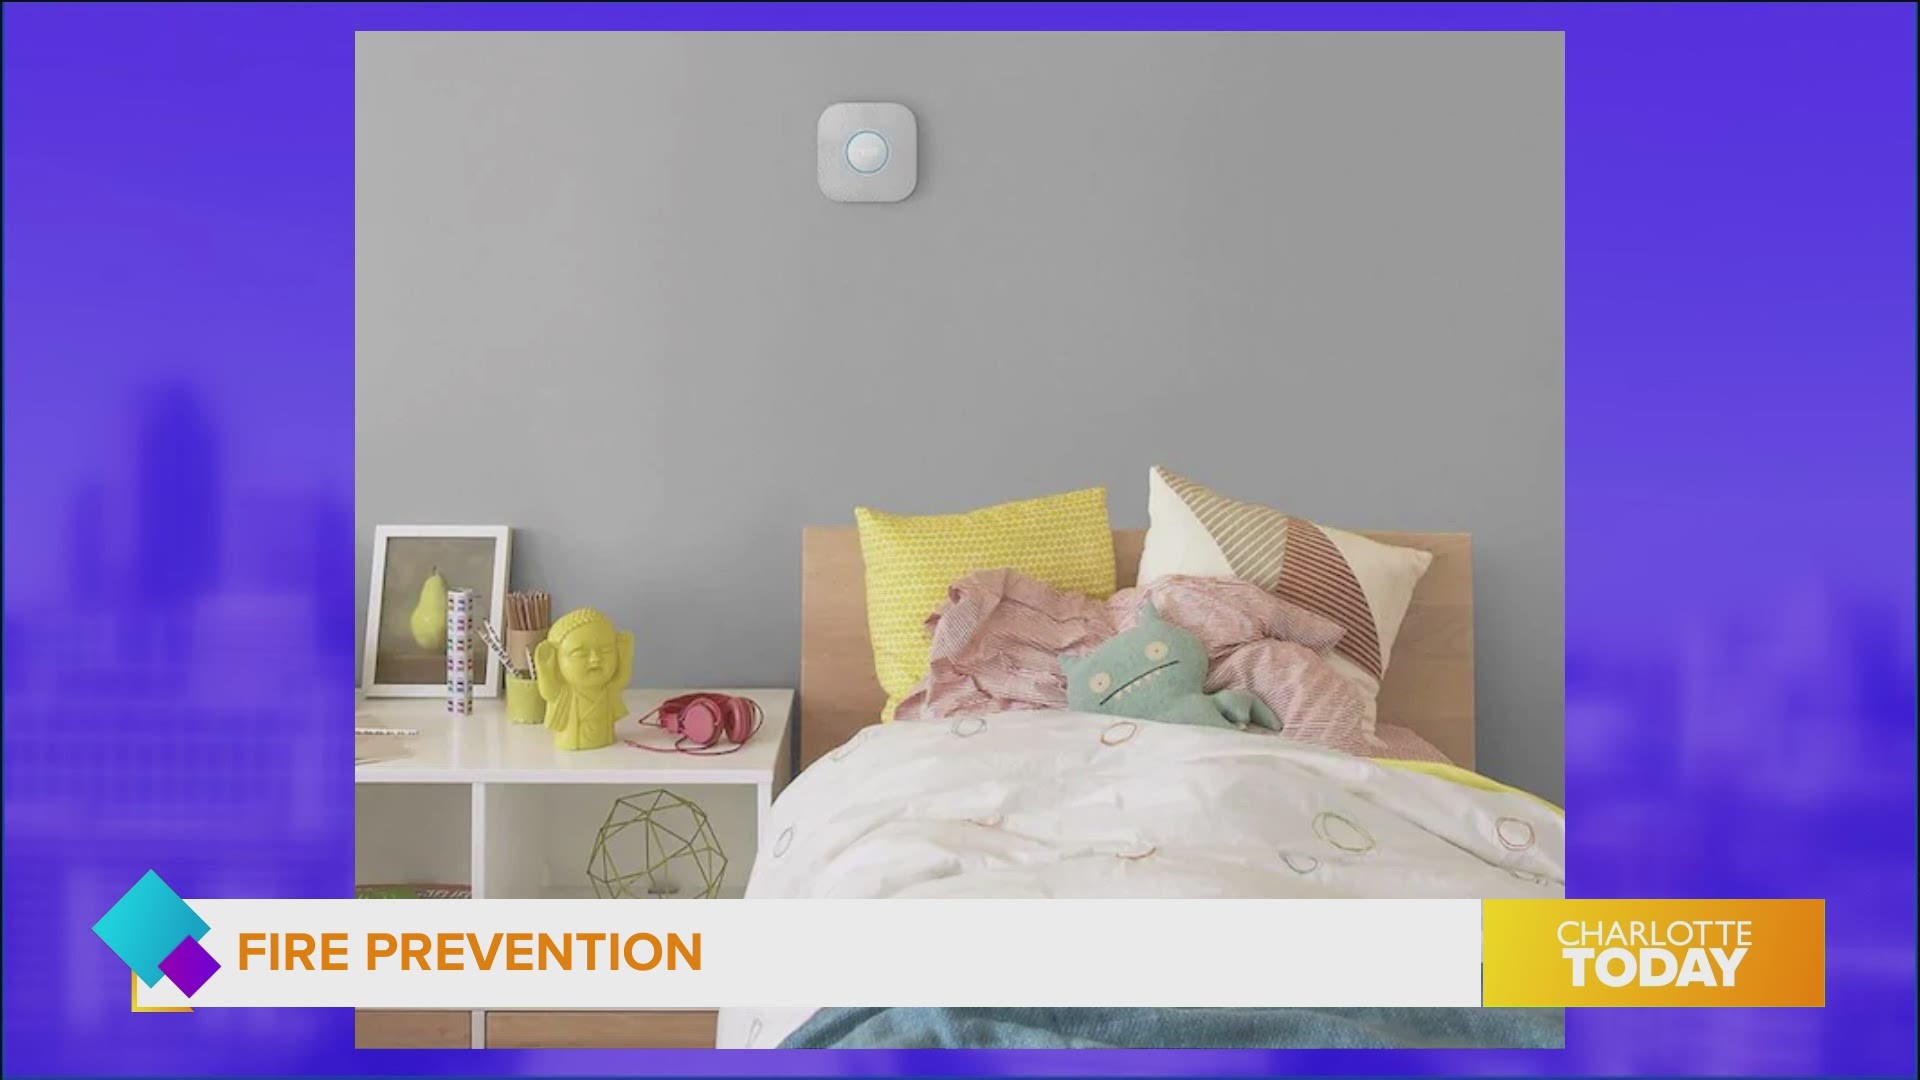 Lowe’s offers some ways to protect your family and make your home safer during Fire Protection Month.